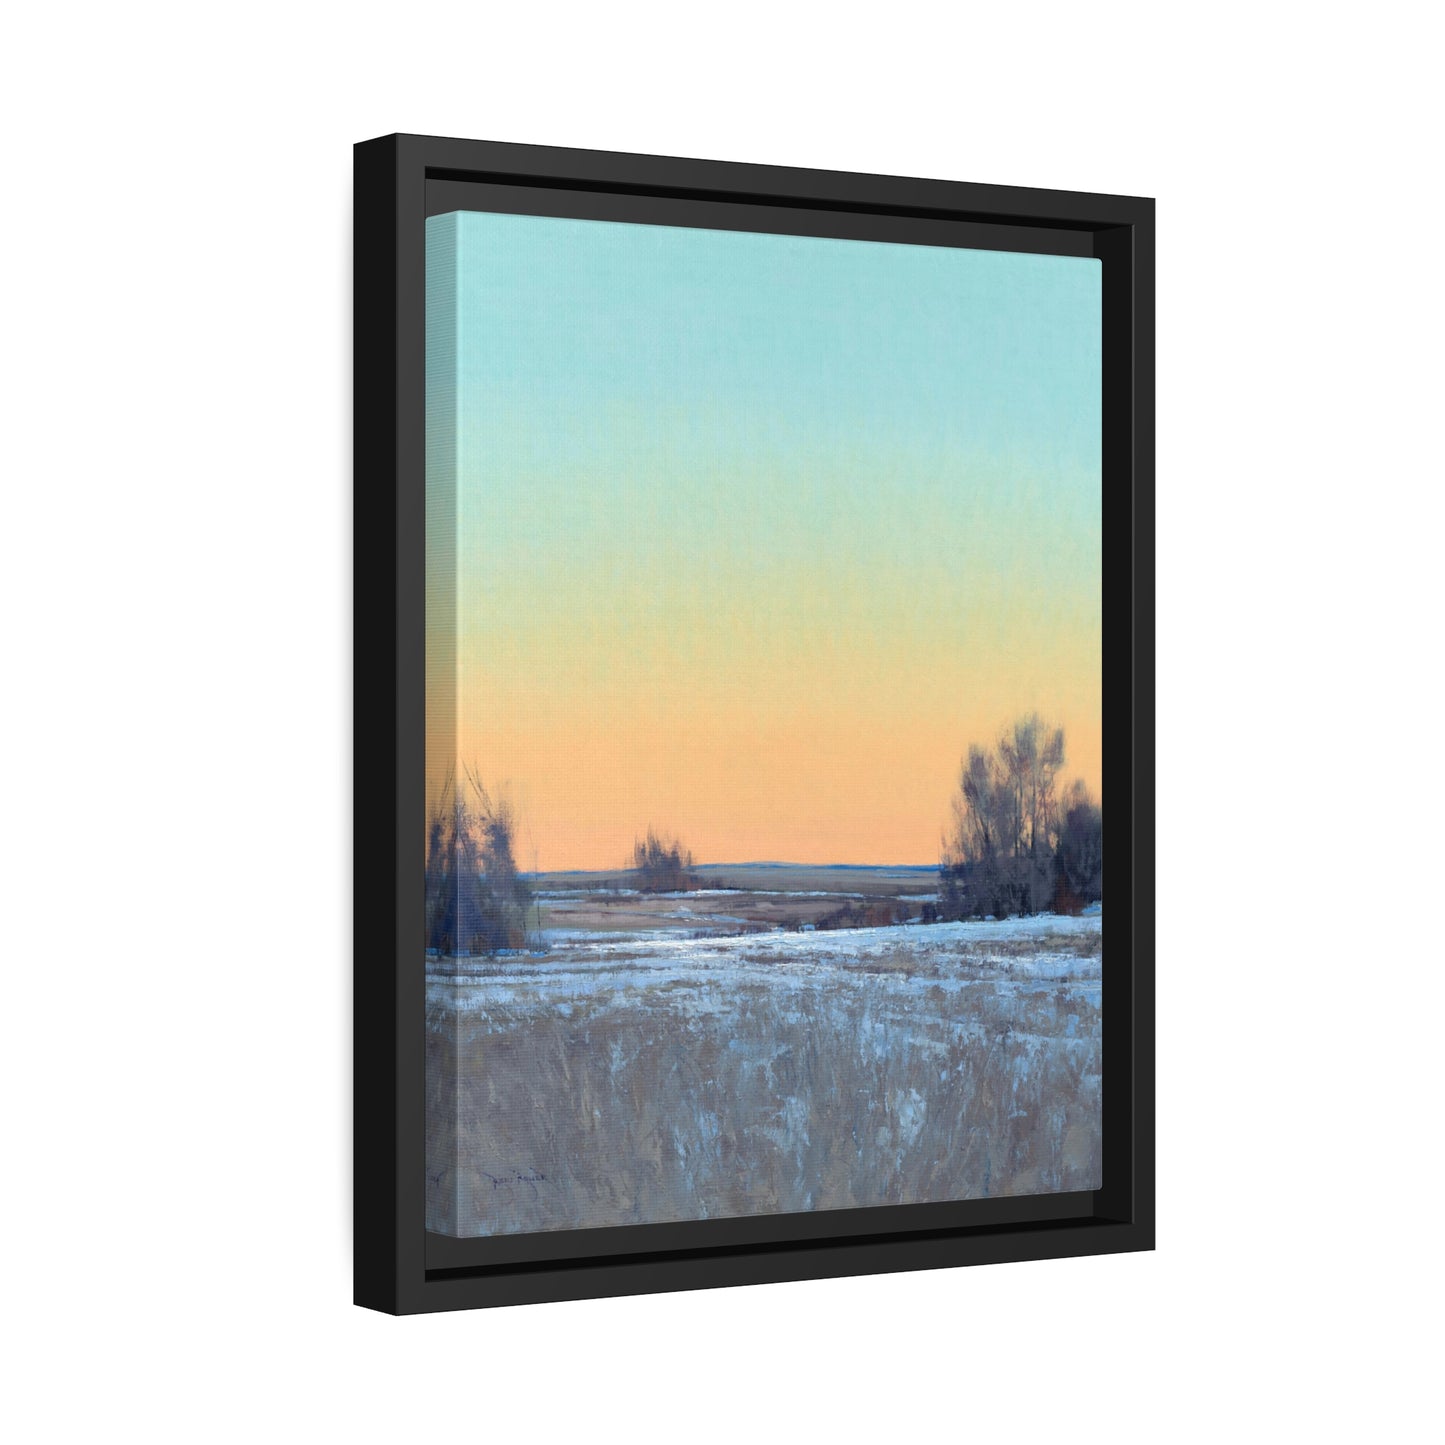 Ben Bauer: "Late Afternoon in March, Lowry, MN" - Framed Canvas Reproduction